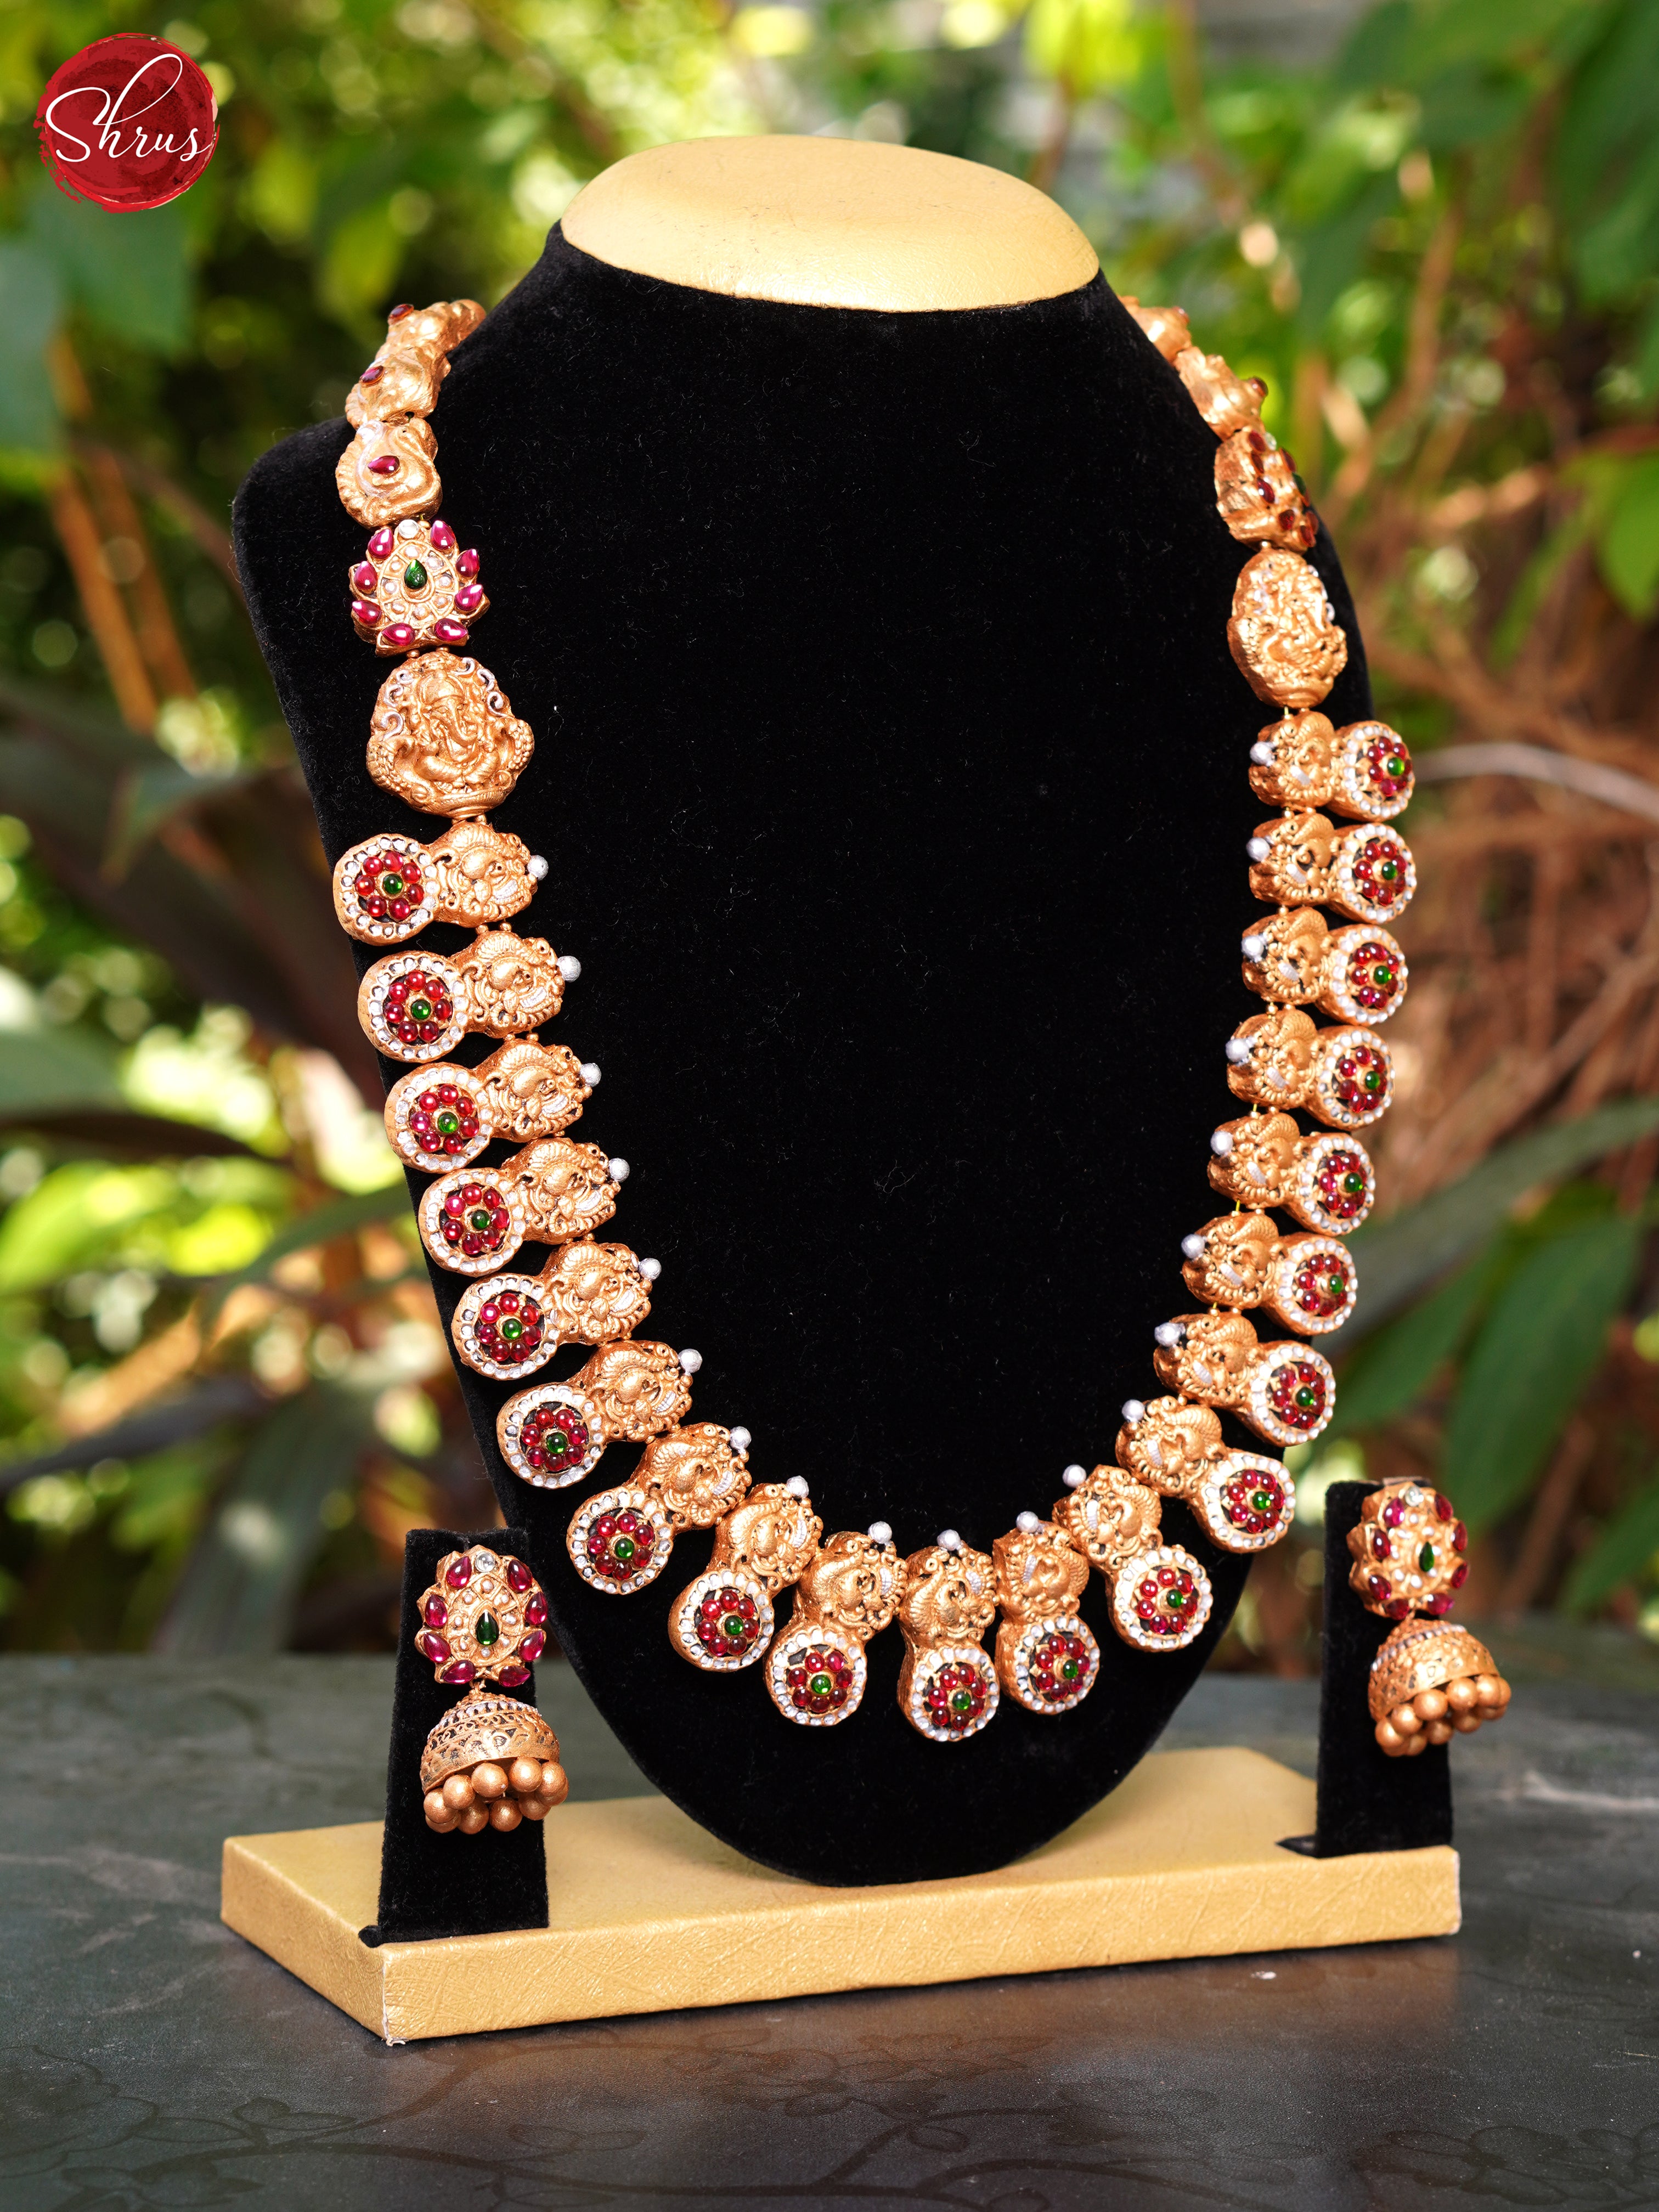 Handcrafted peacock terracotta necklace with jhumka- Accessories - Shop on ShrusEternity.com